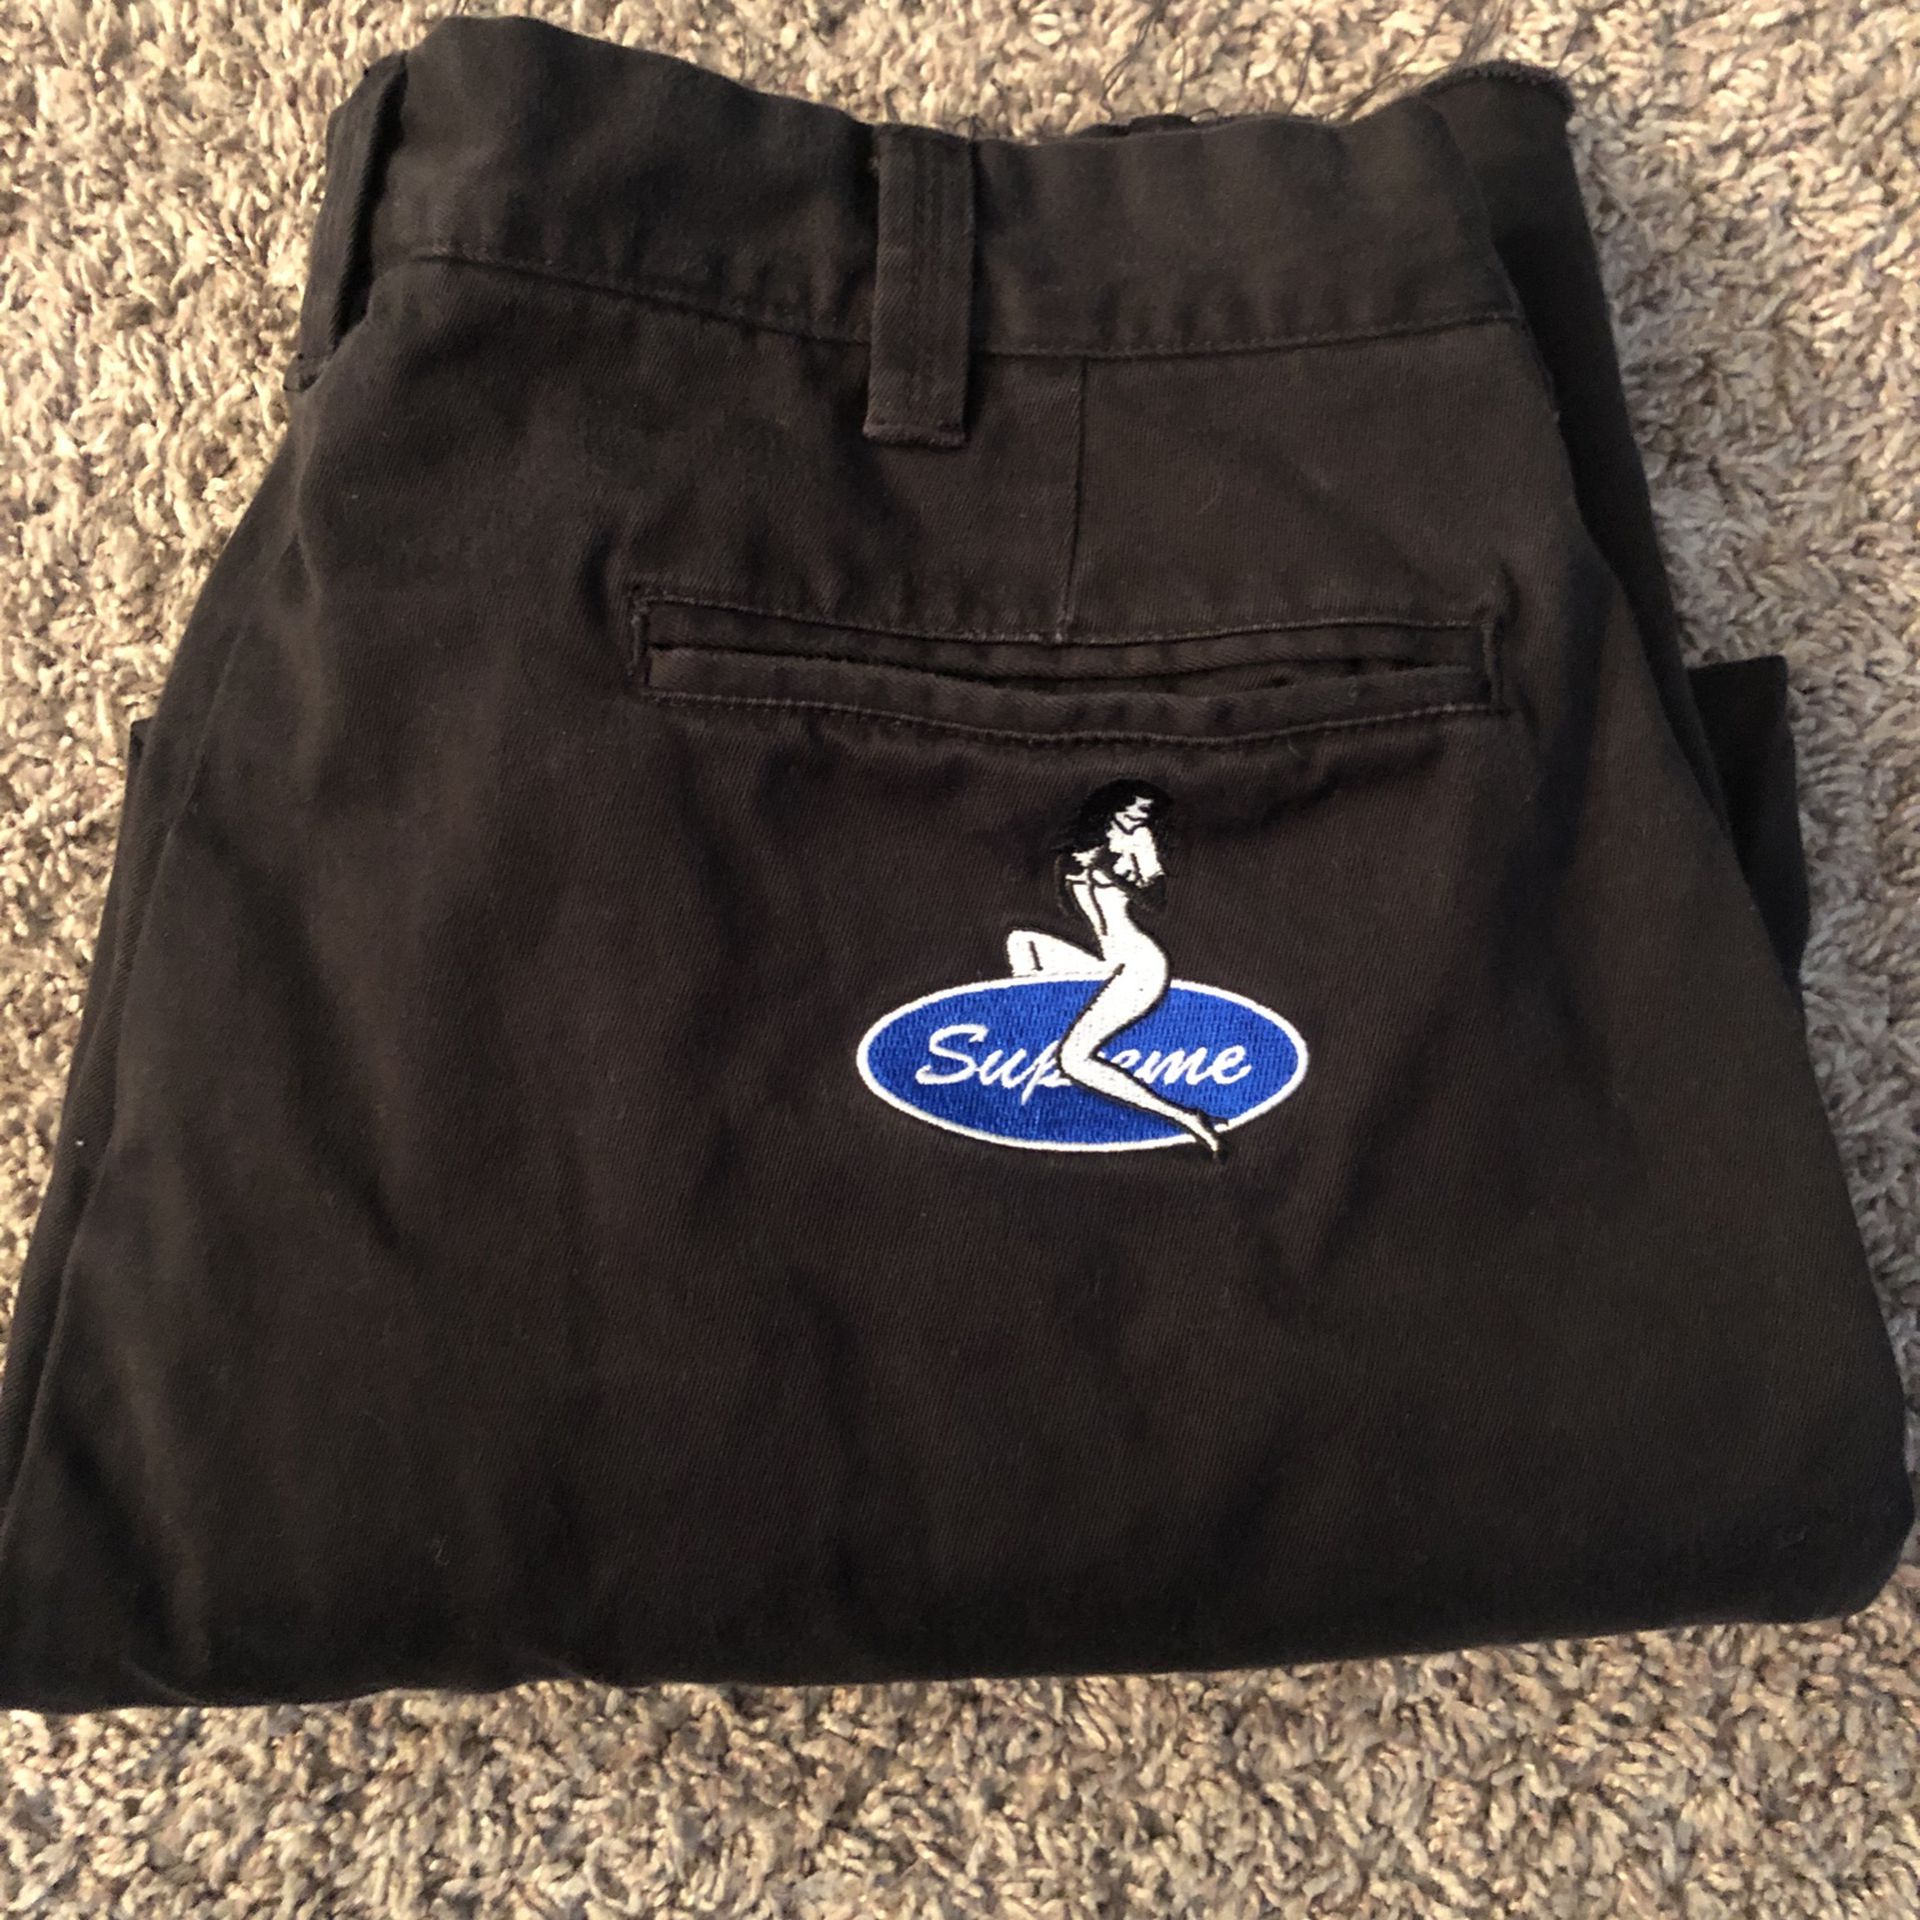 Supreme Pin Up Chino Pants Size 32 for Sale in Temecula, CA